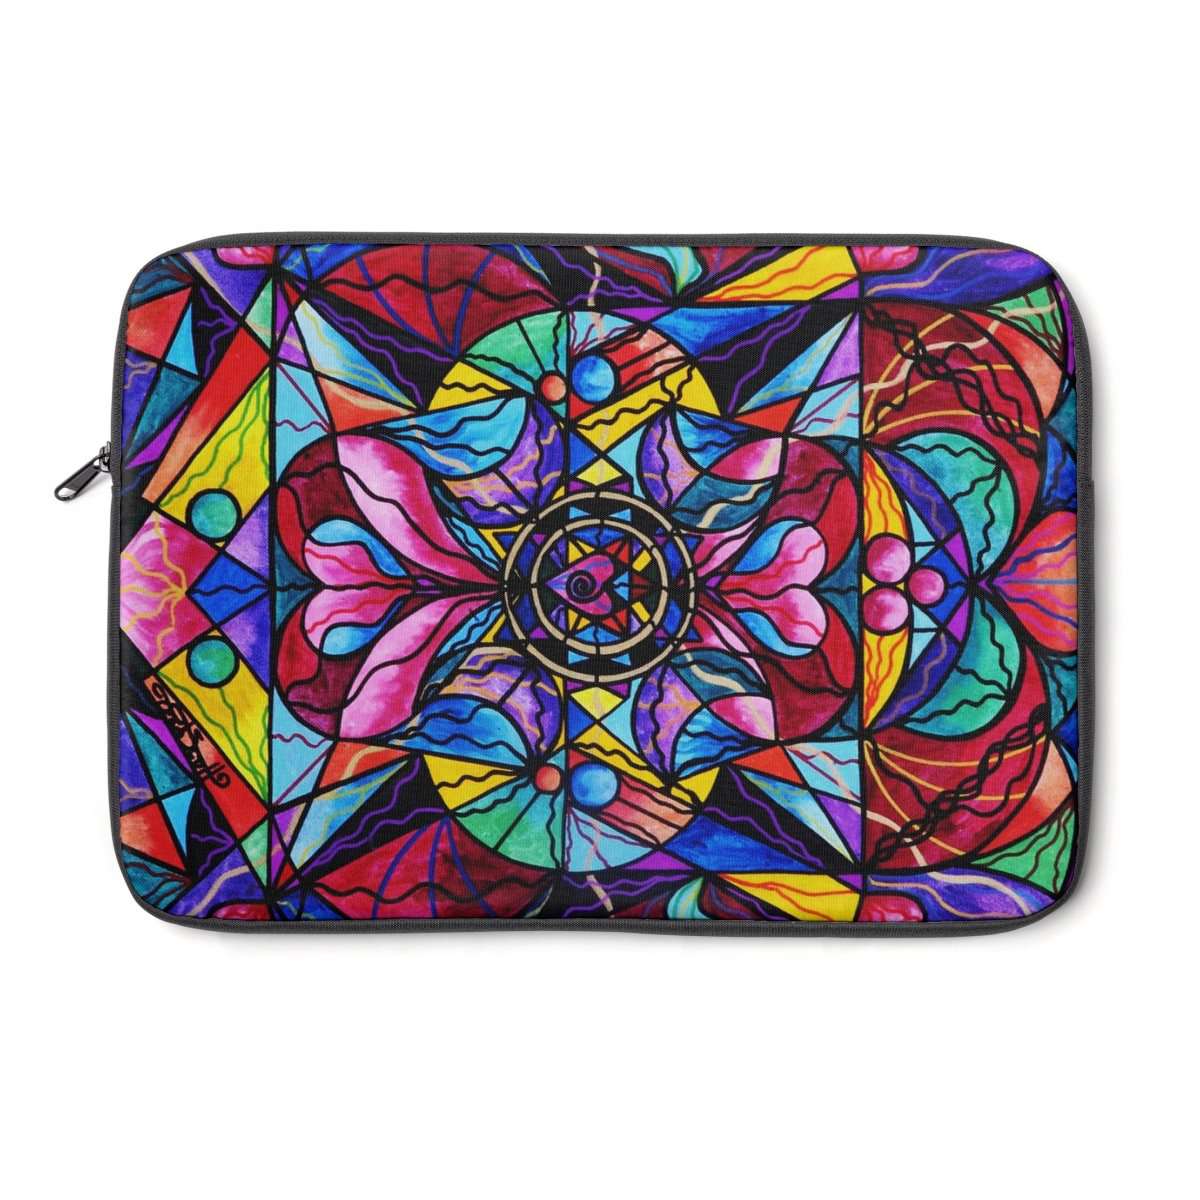 we-offer-the-best-prices-on-the-best-of-blue-ray-self-love-grid-laptop-sleeve-online_0.jpg